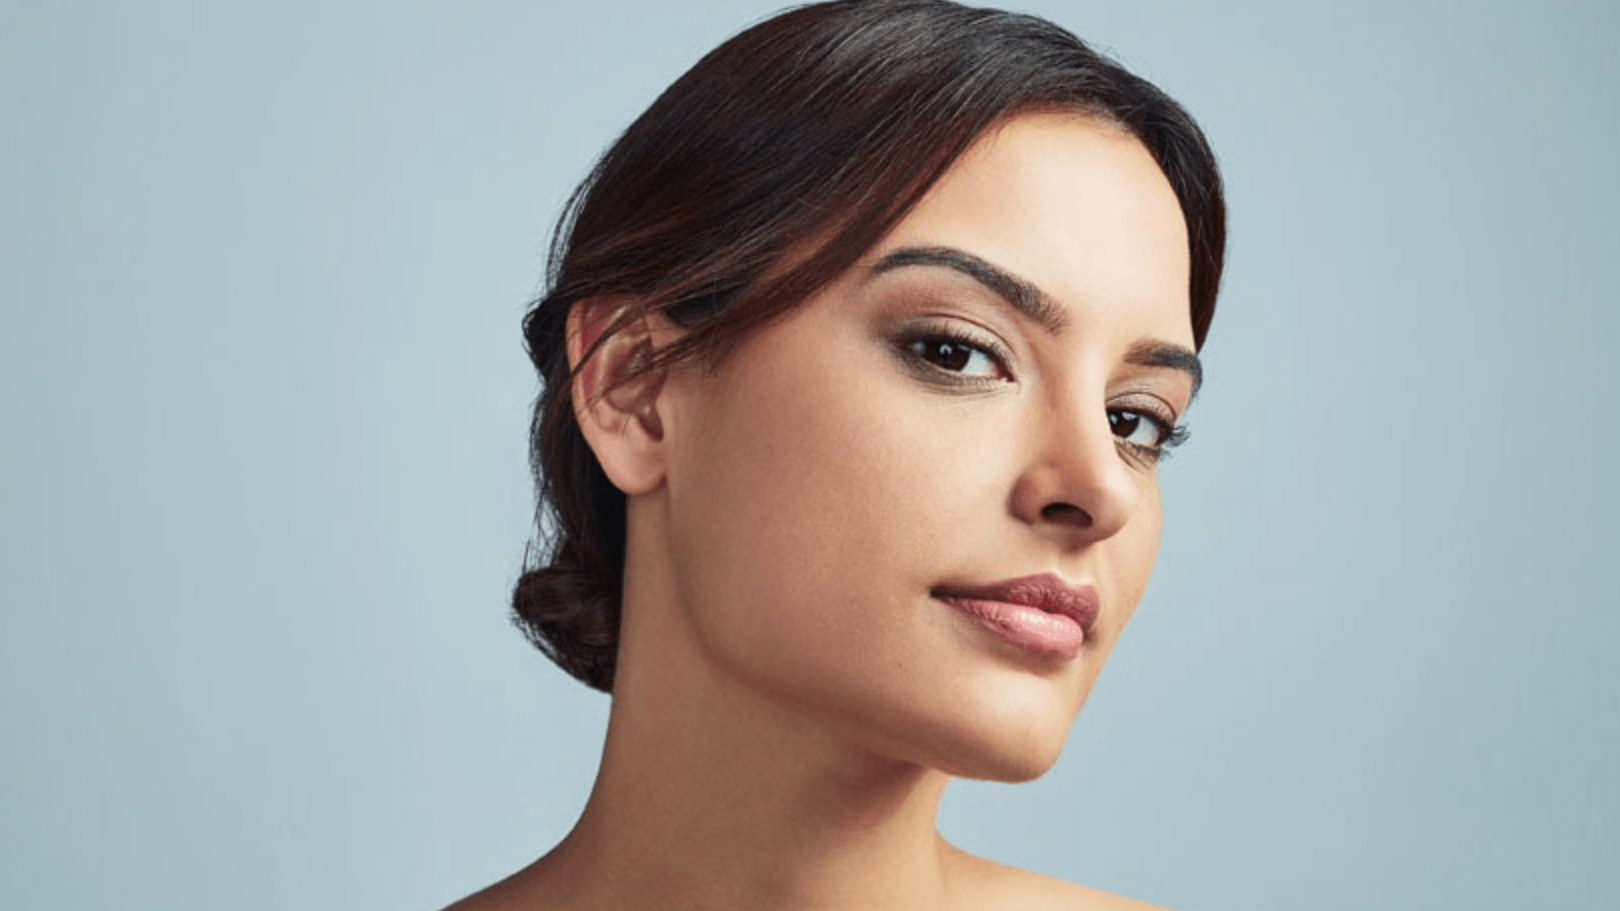 How Long Does Juvederm Last? - Cosmetic Dermatology ... for BeginnersThe How Long Do Dermal Fillers Last? - American Society Of Plastic ... Statements thumbnail